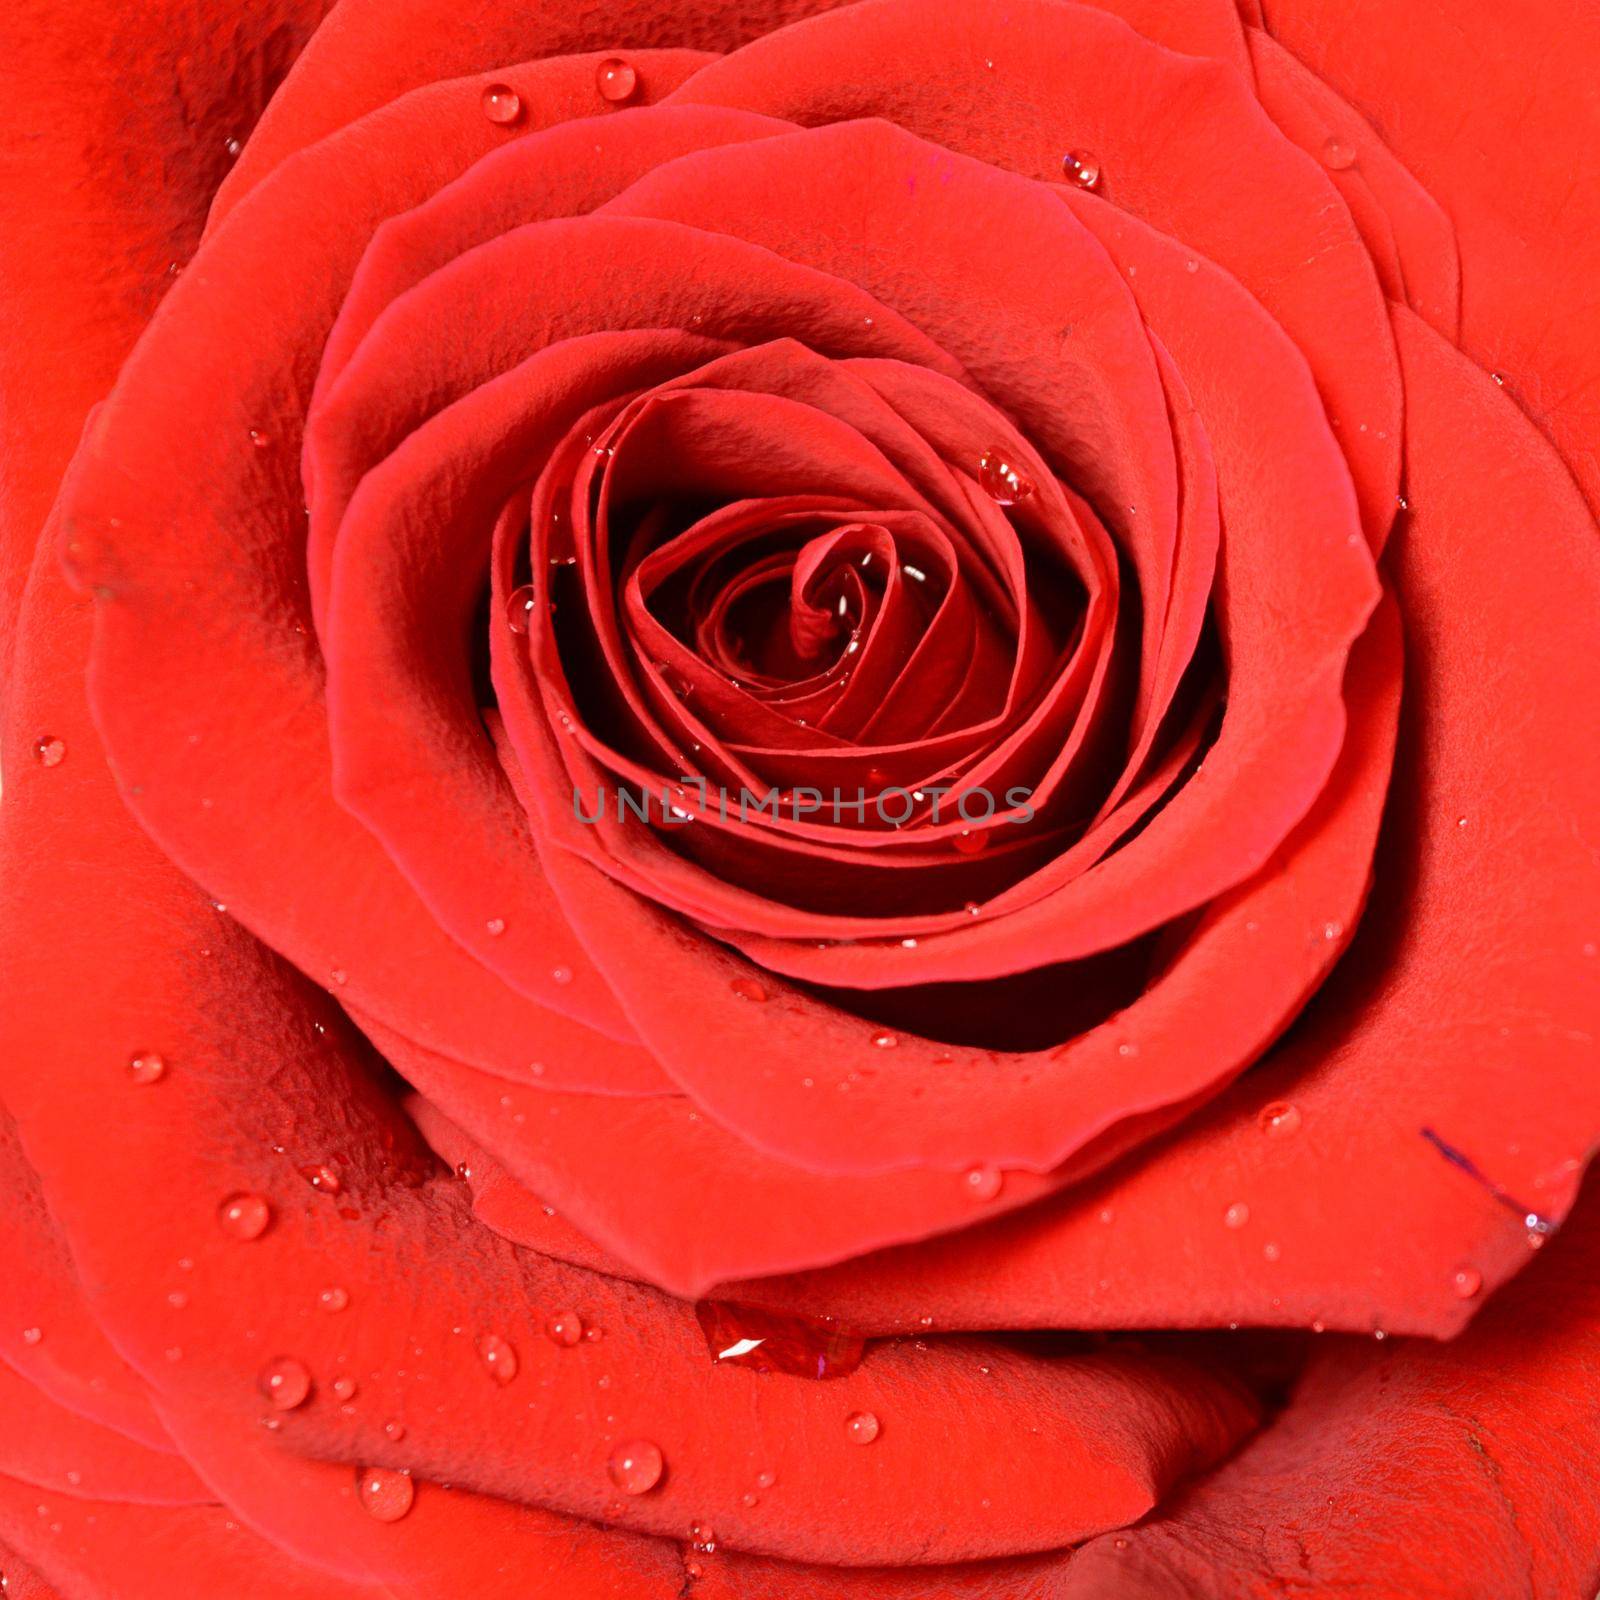 A full frame macro of a red rose with dew droplets on its soft petals.